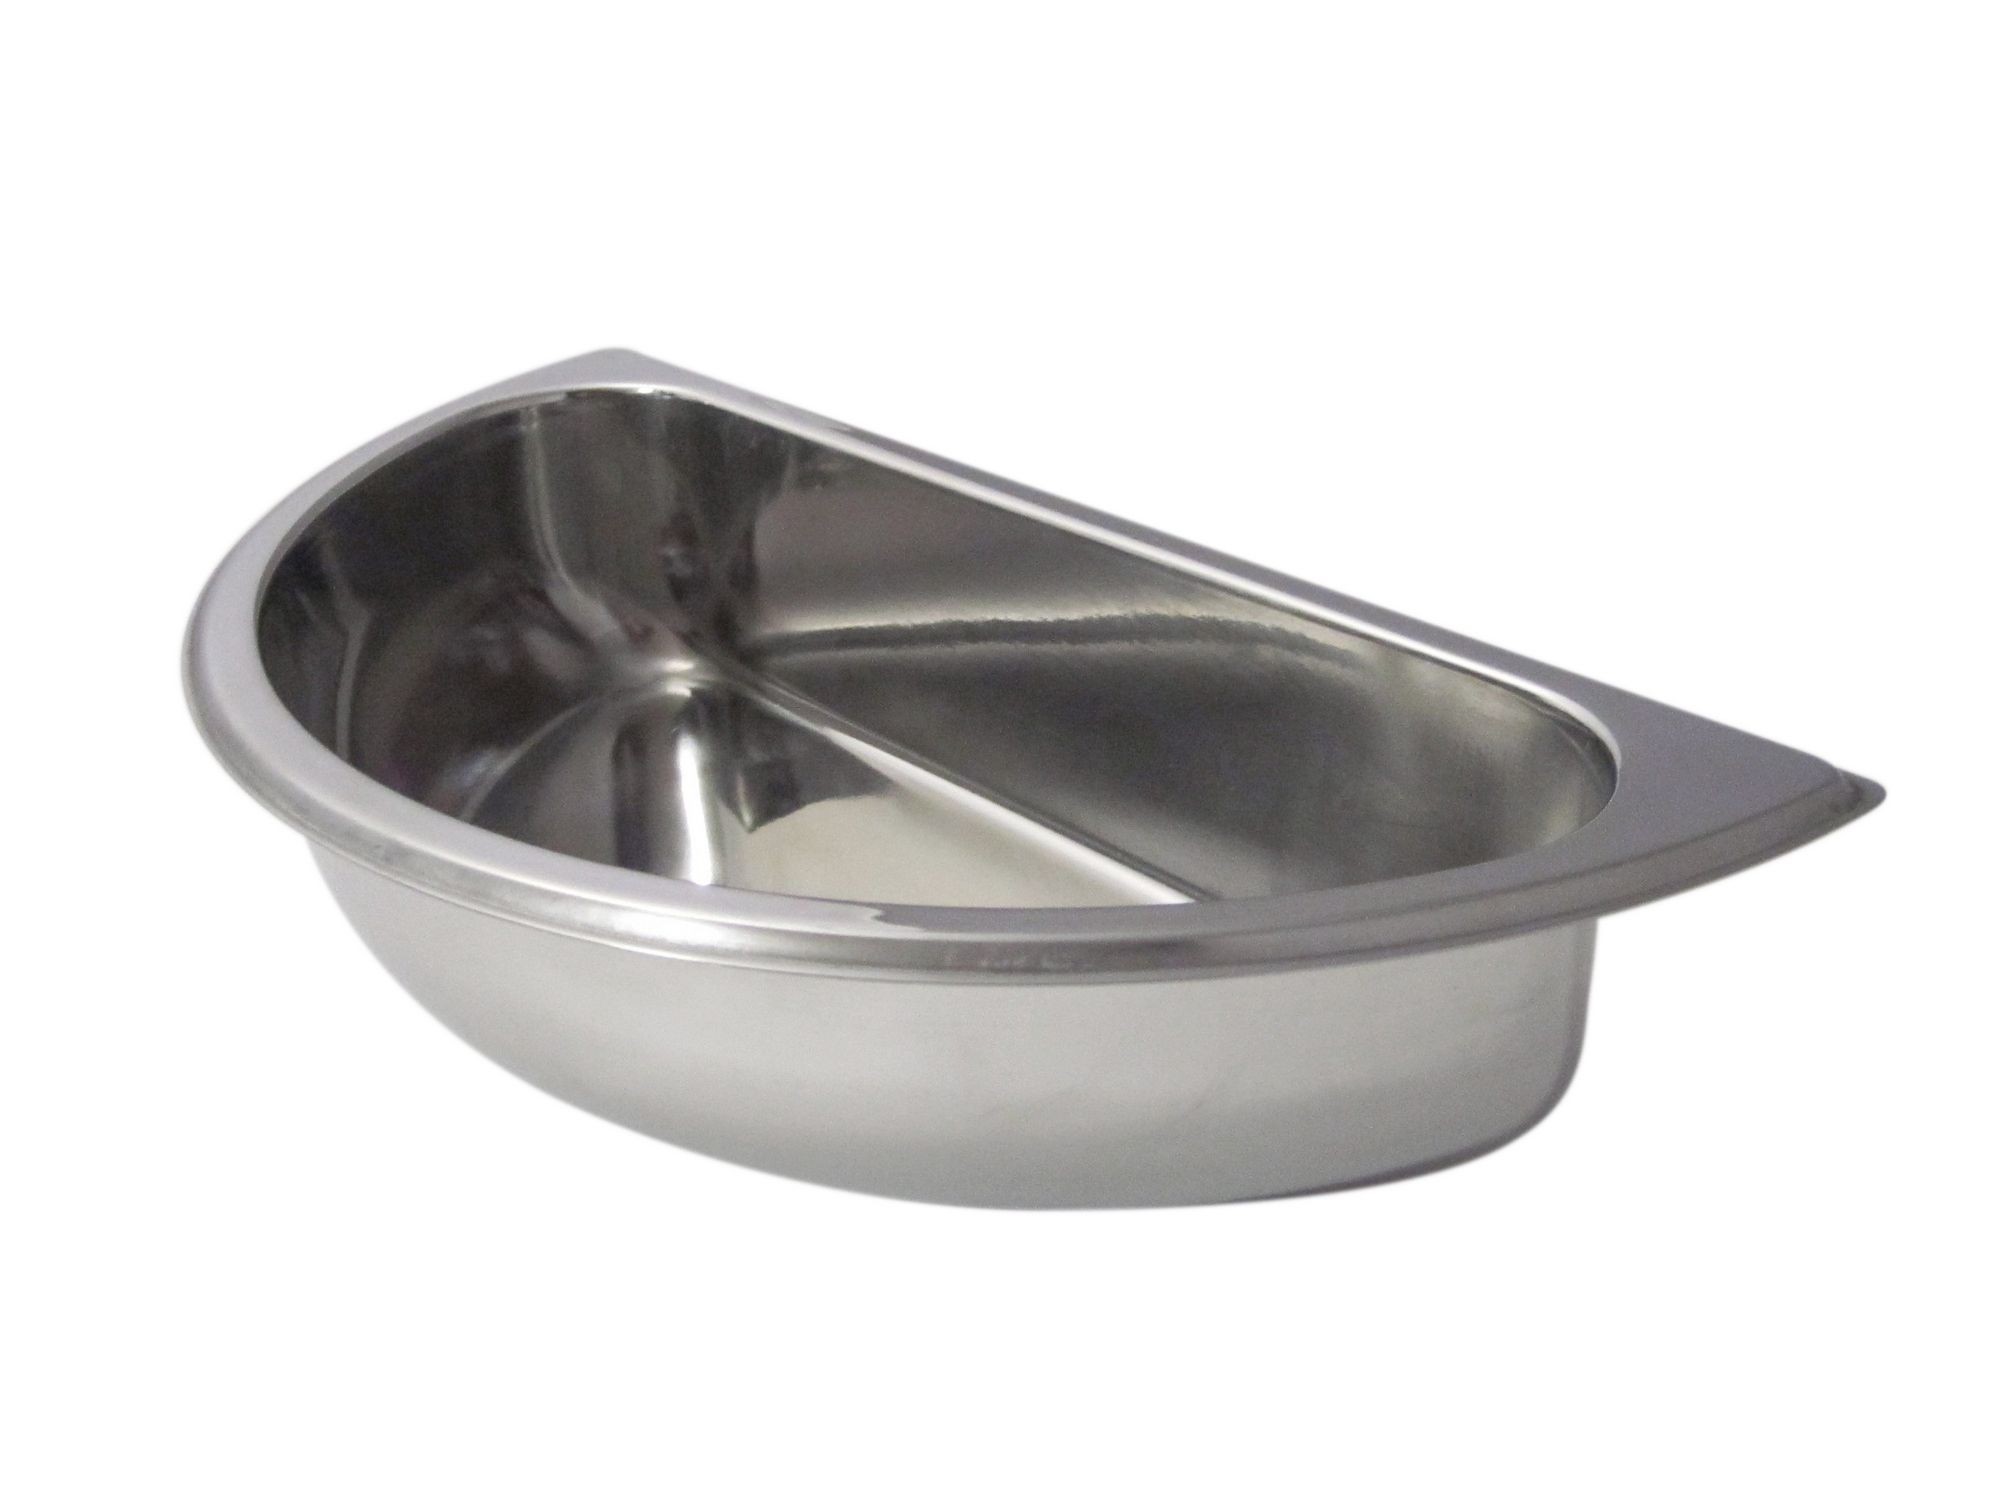 Bon Chef 12007 Stainless Steel Half Size Round Food Pan, 2 1/2 Qt.